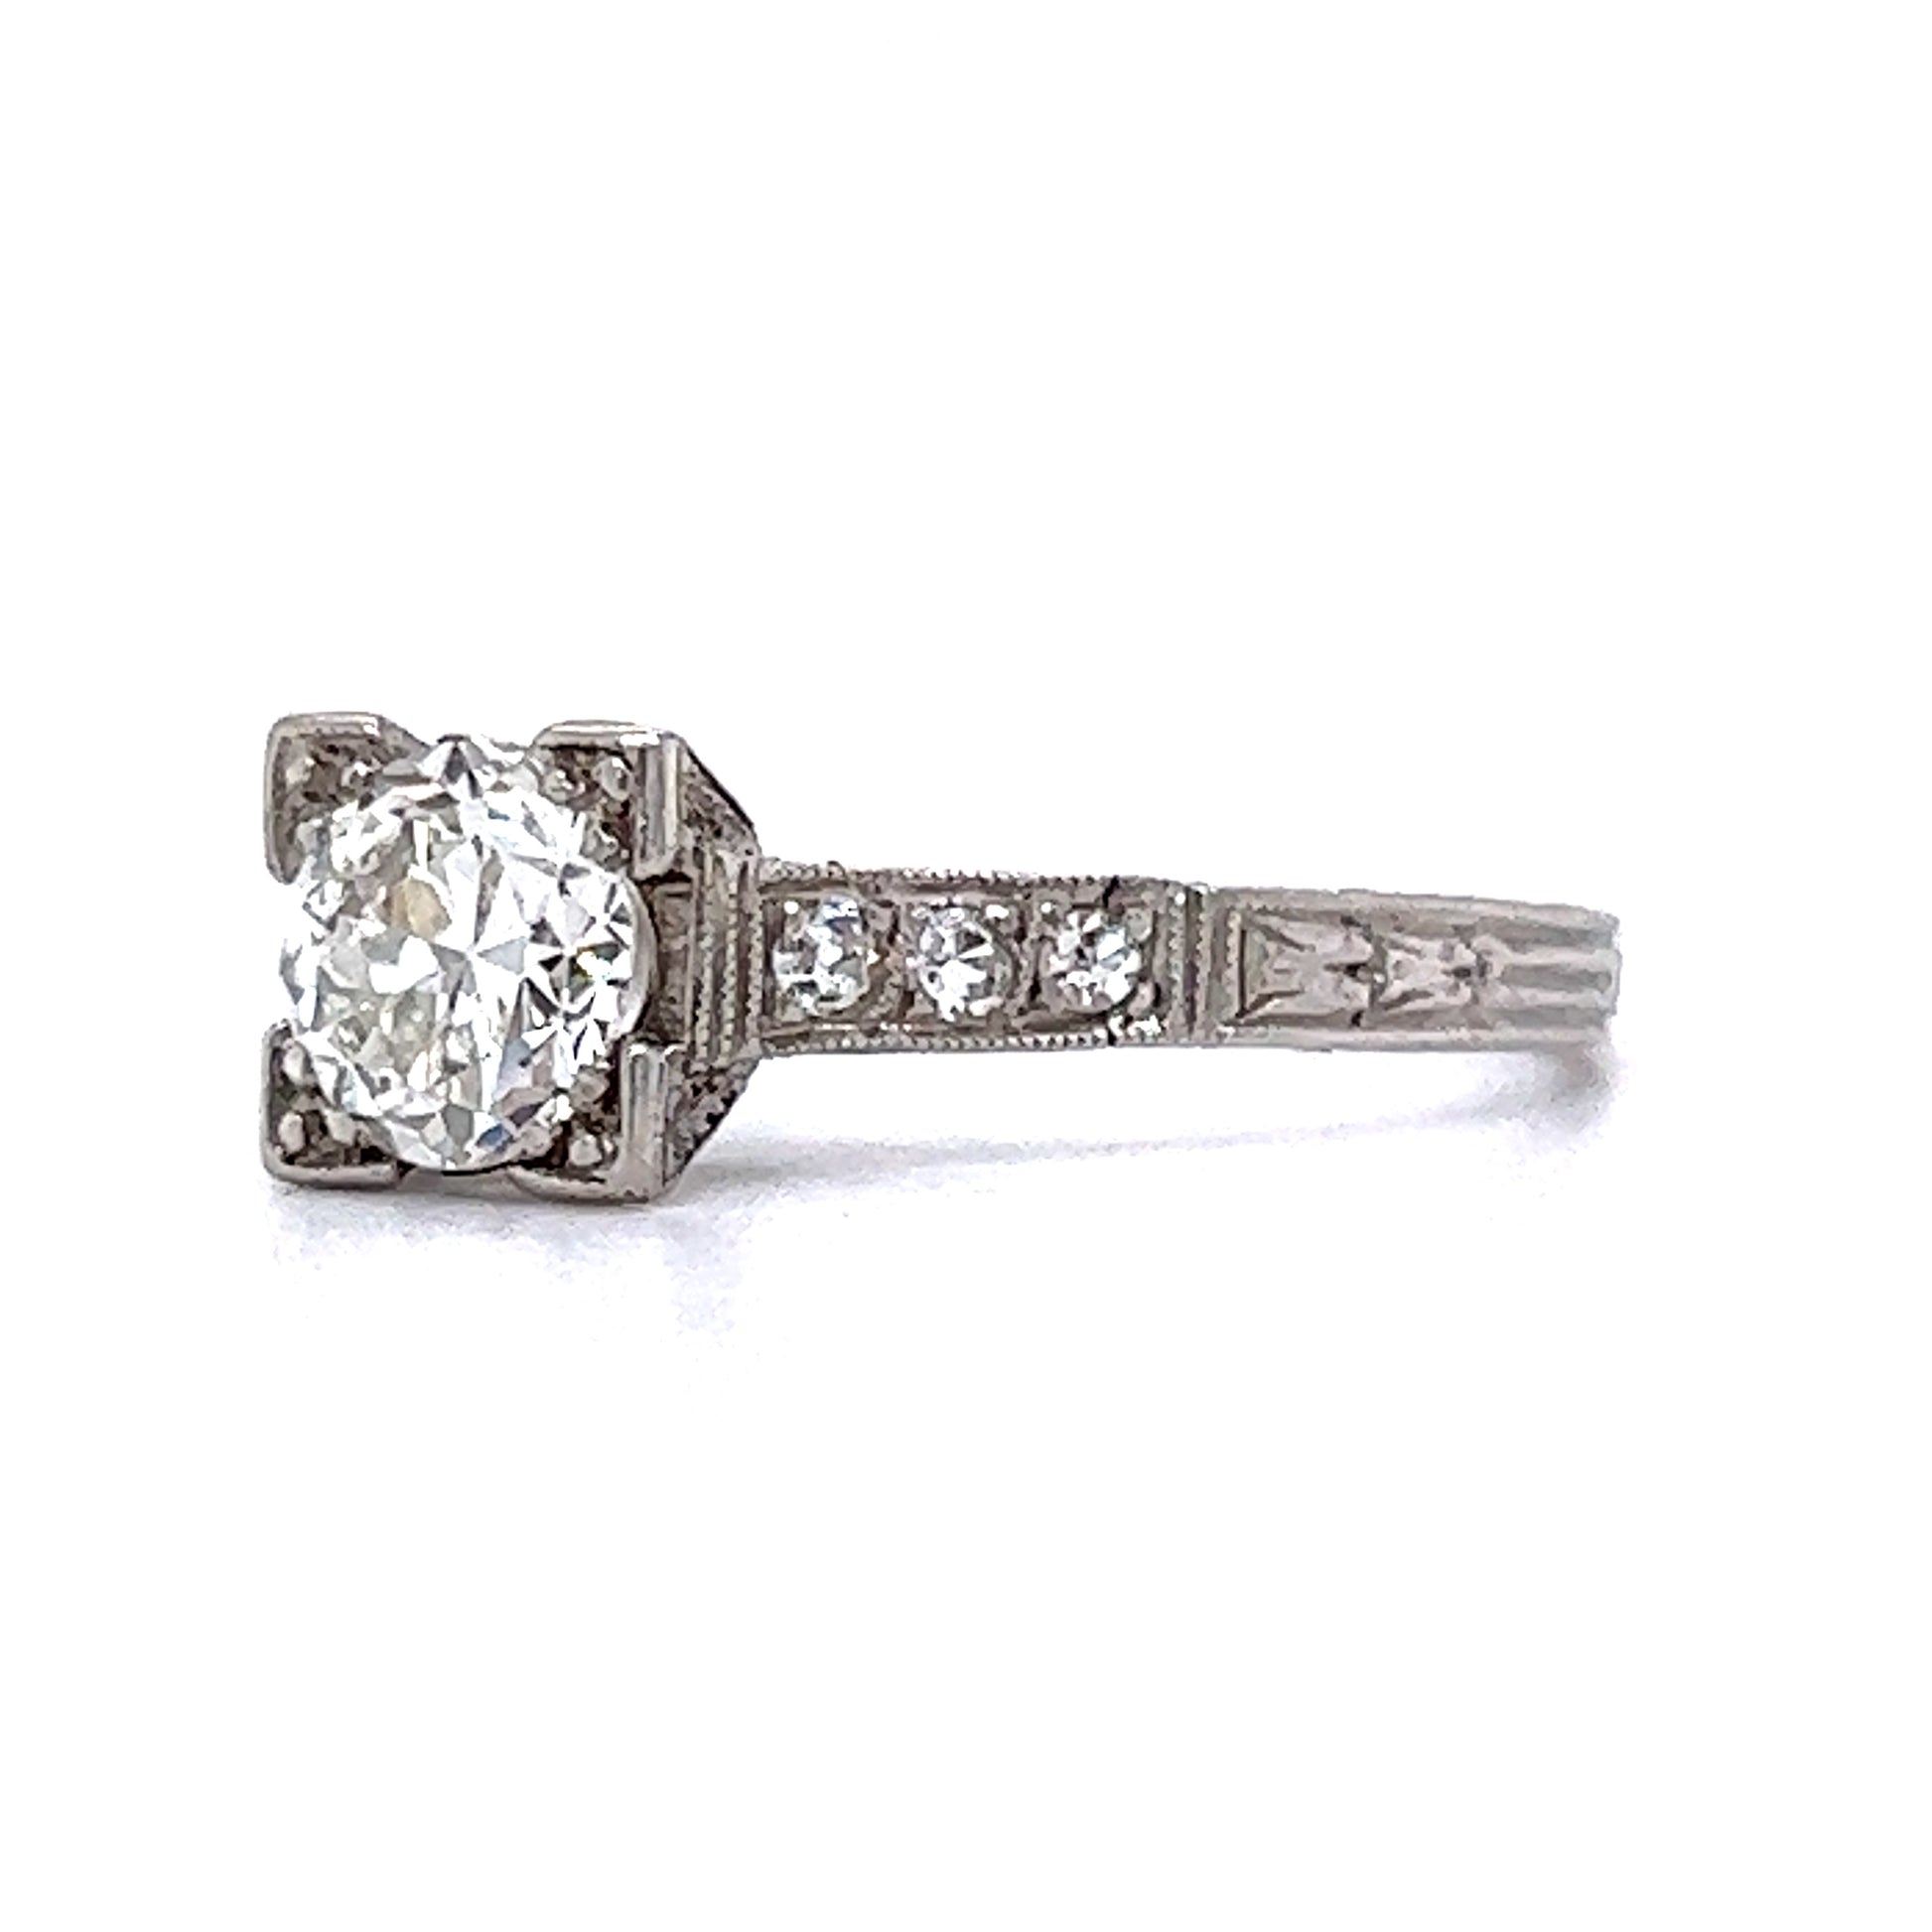 .70 Old European Cut Diamond Engagement Ring in PlatinumComposition: PlatinumRing Size: 7Total Diamond Weight: .79 ctTotal Gram Weight: 2.6 gInscription: 5% IRID PLAT